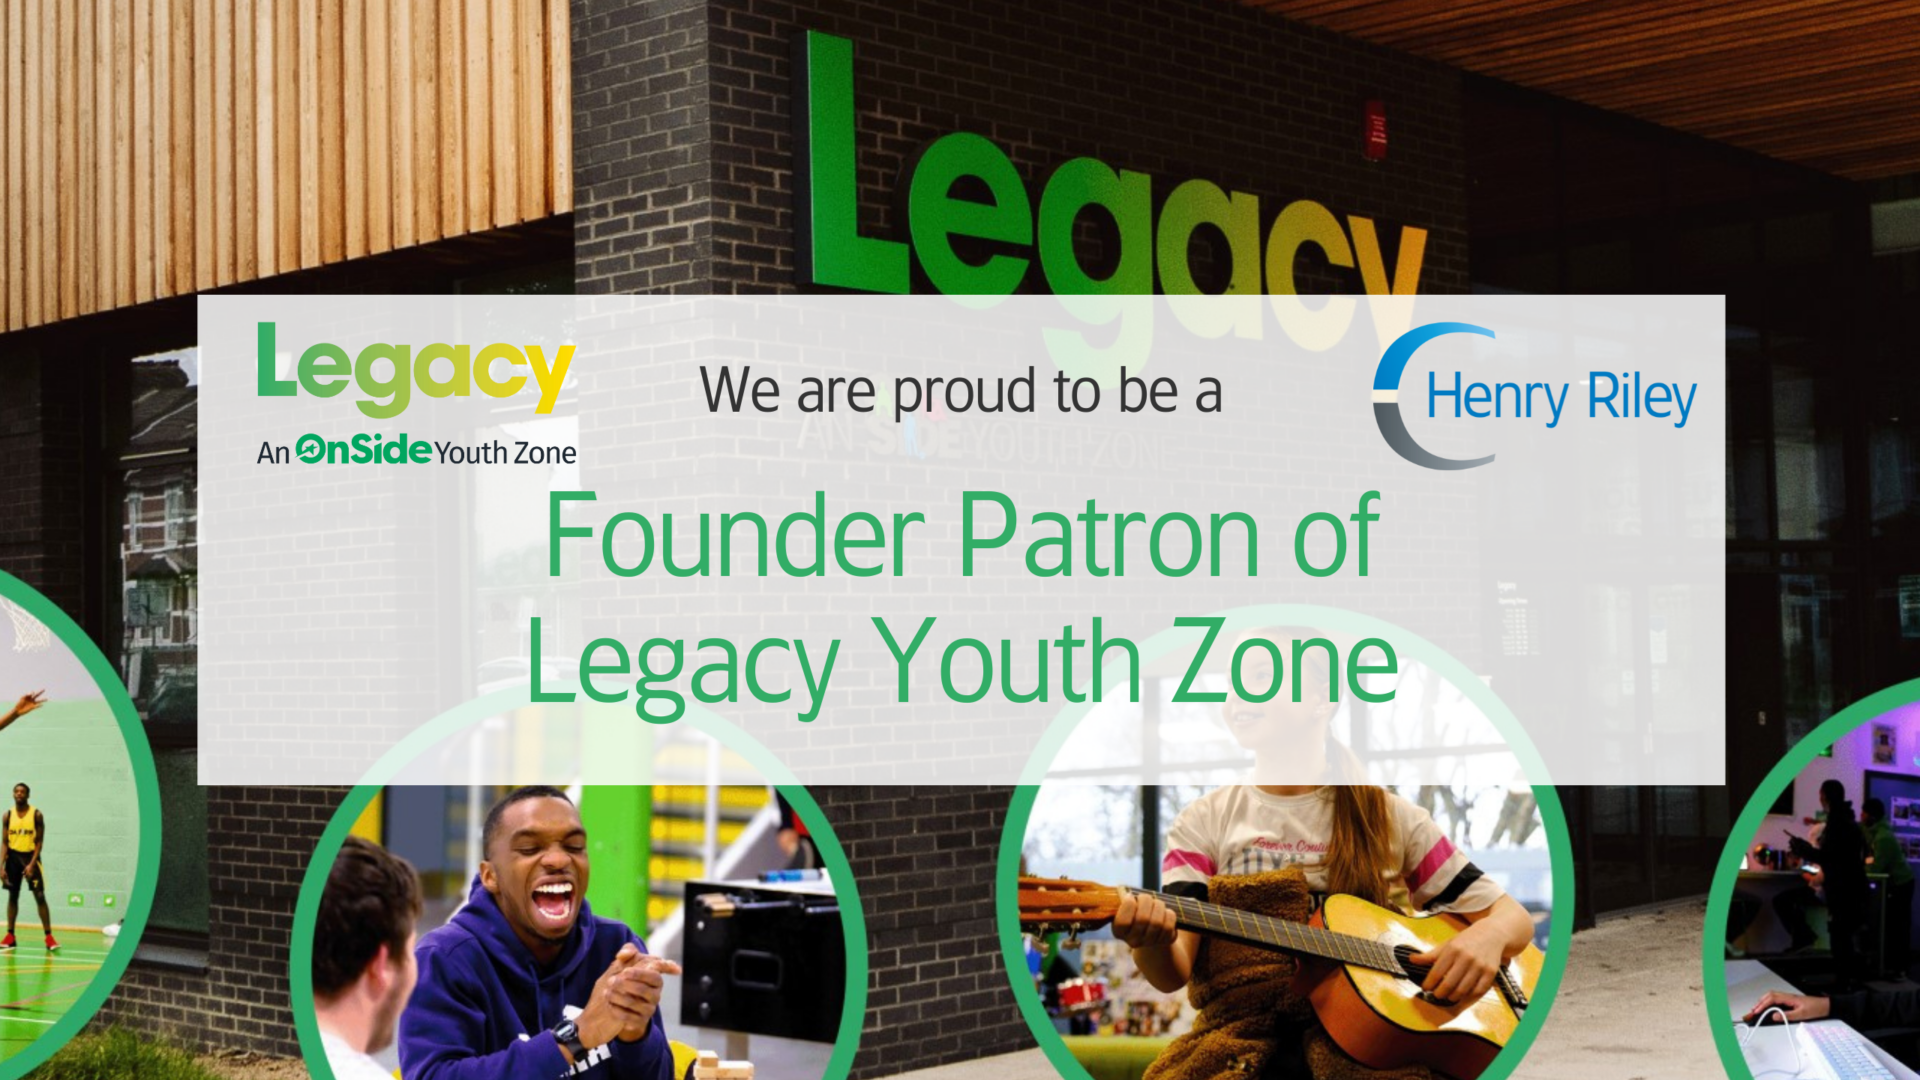 We are proud to be a Founder Patron of Legacy Youth Zone